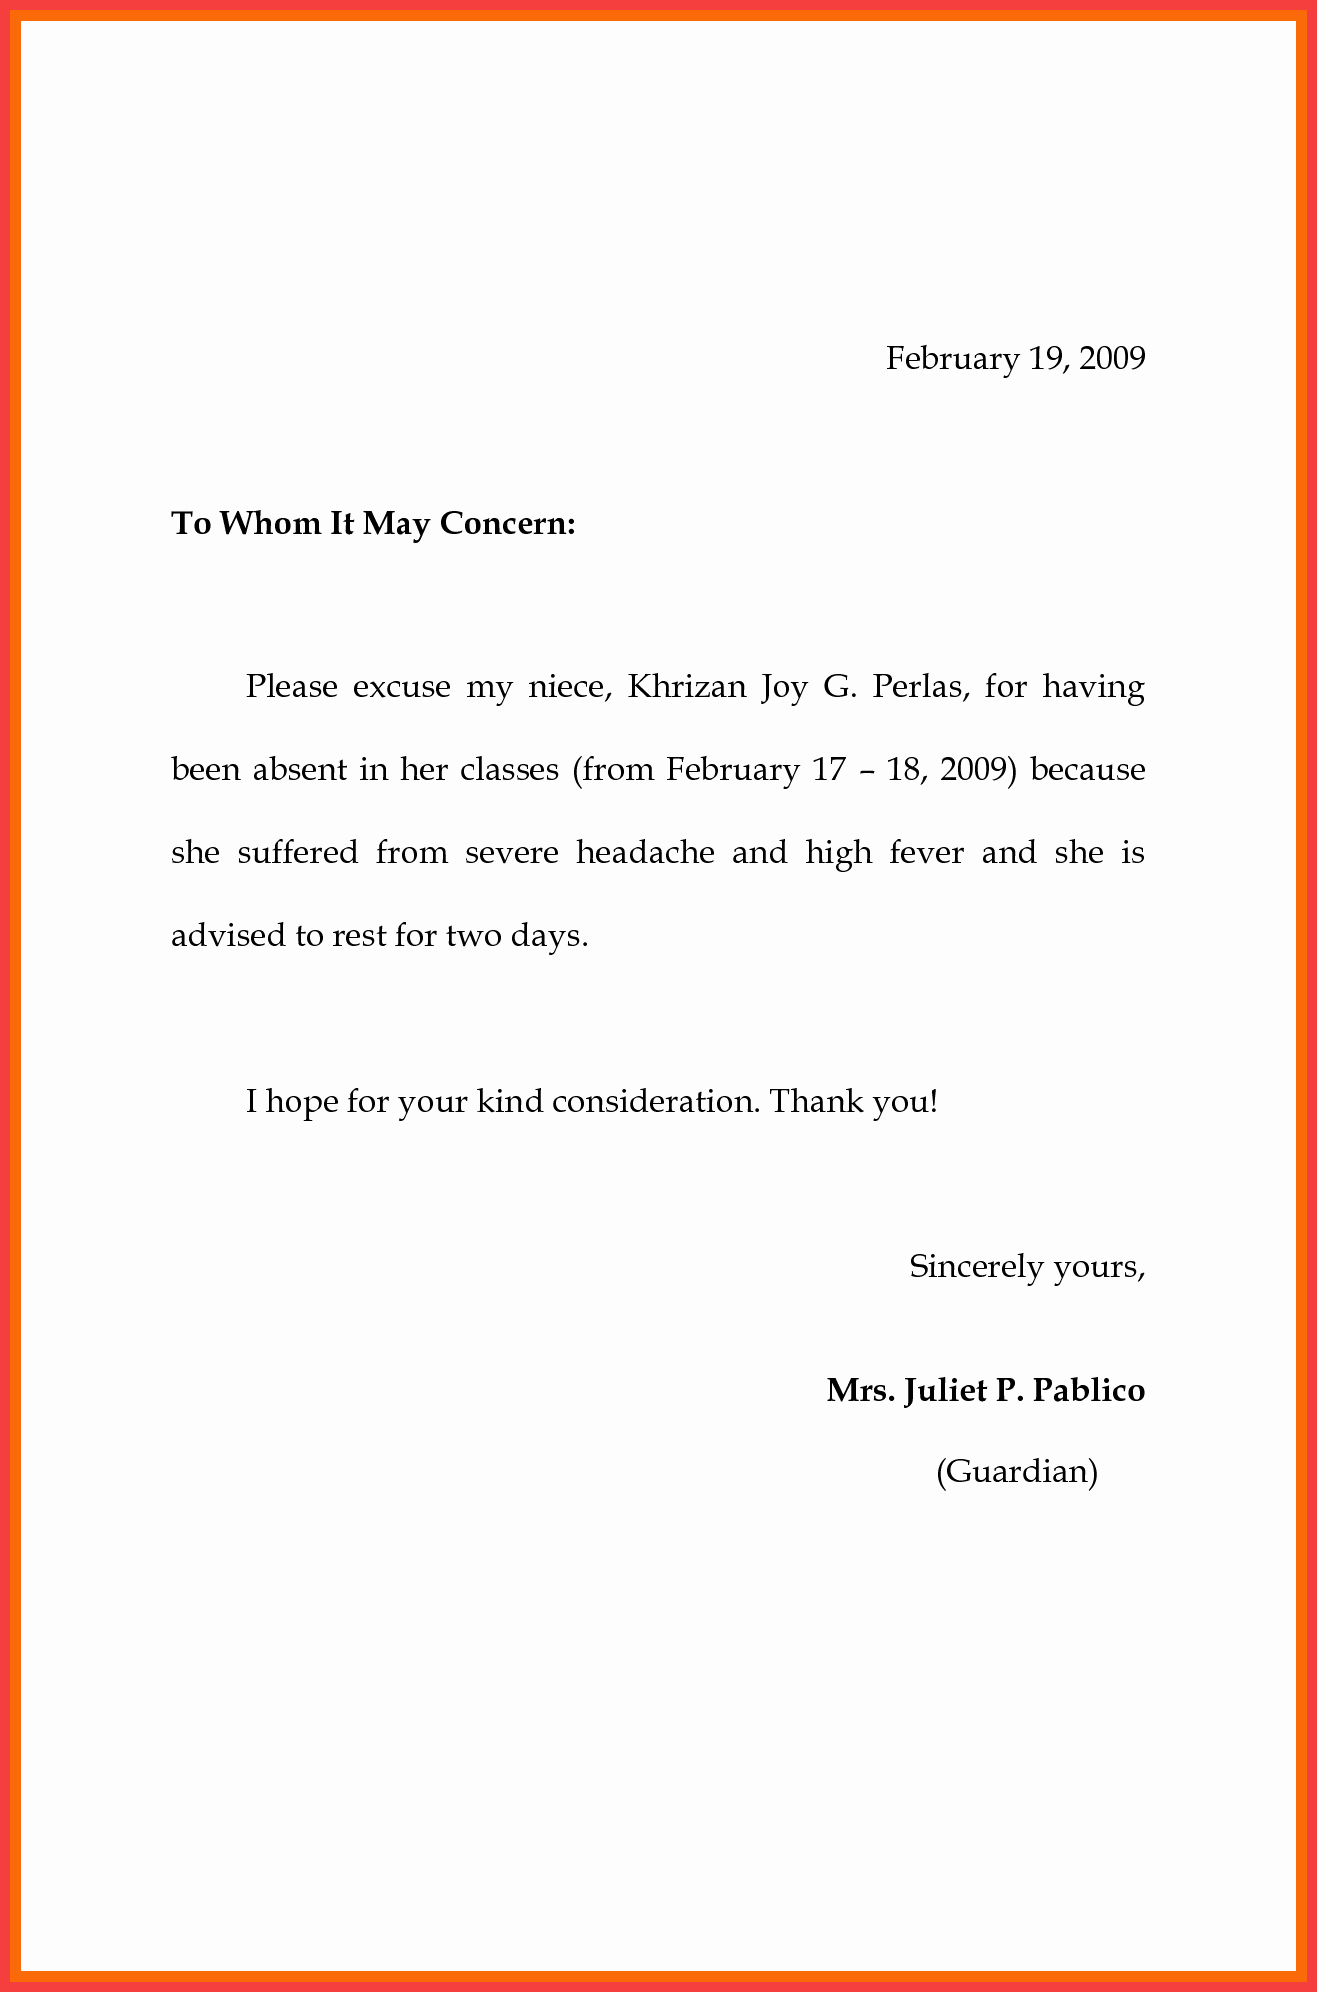 Dentist Excuse Letter for School New Excuses for School Absences